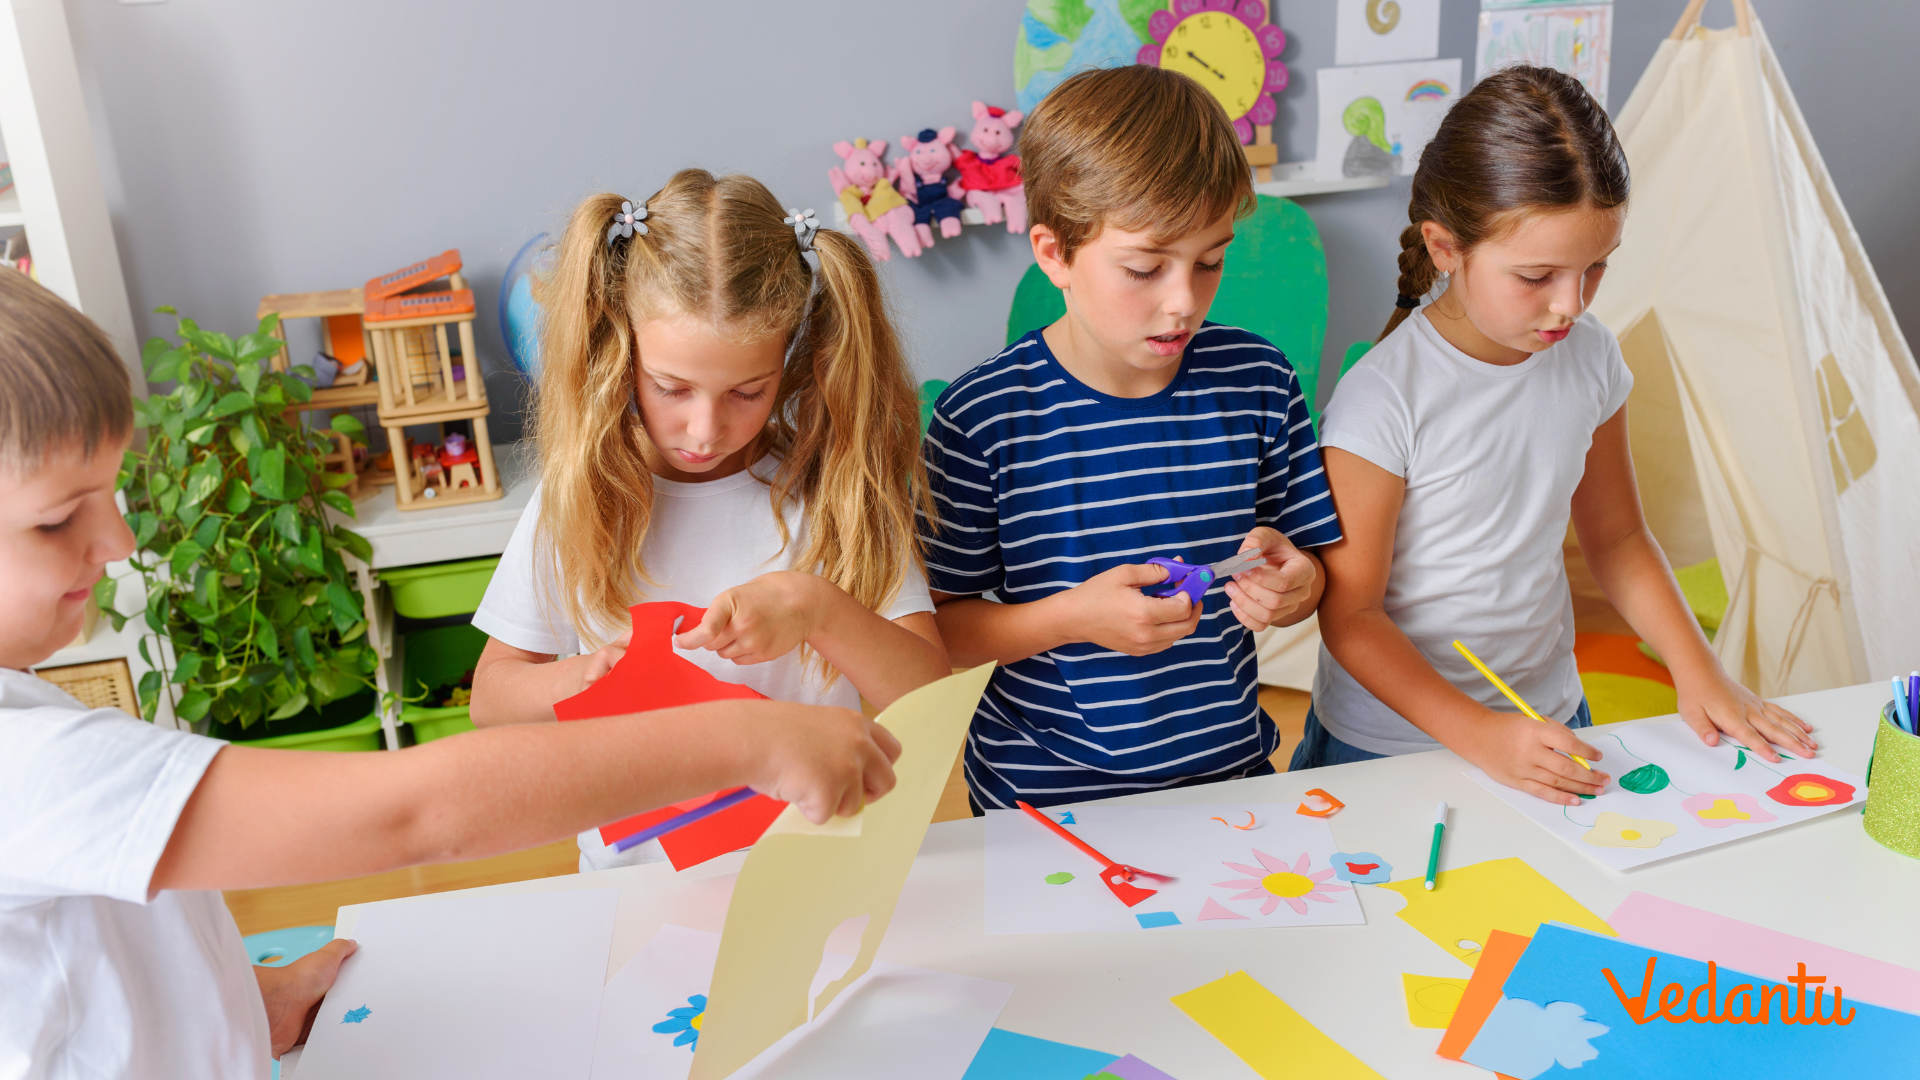 25+ Summer Camp Crafts and Art Activities for Kids